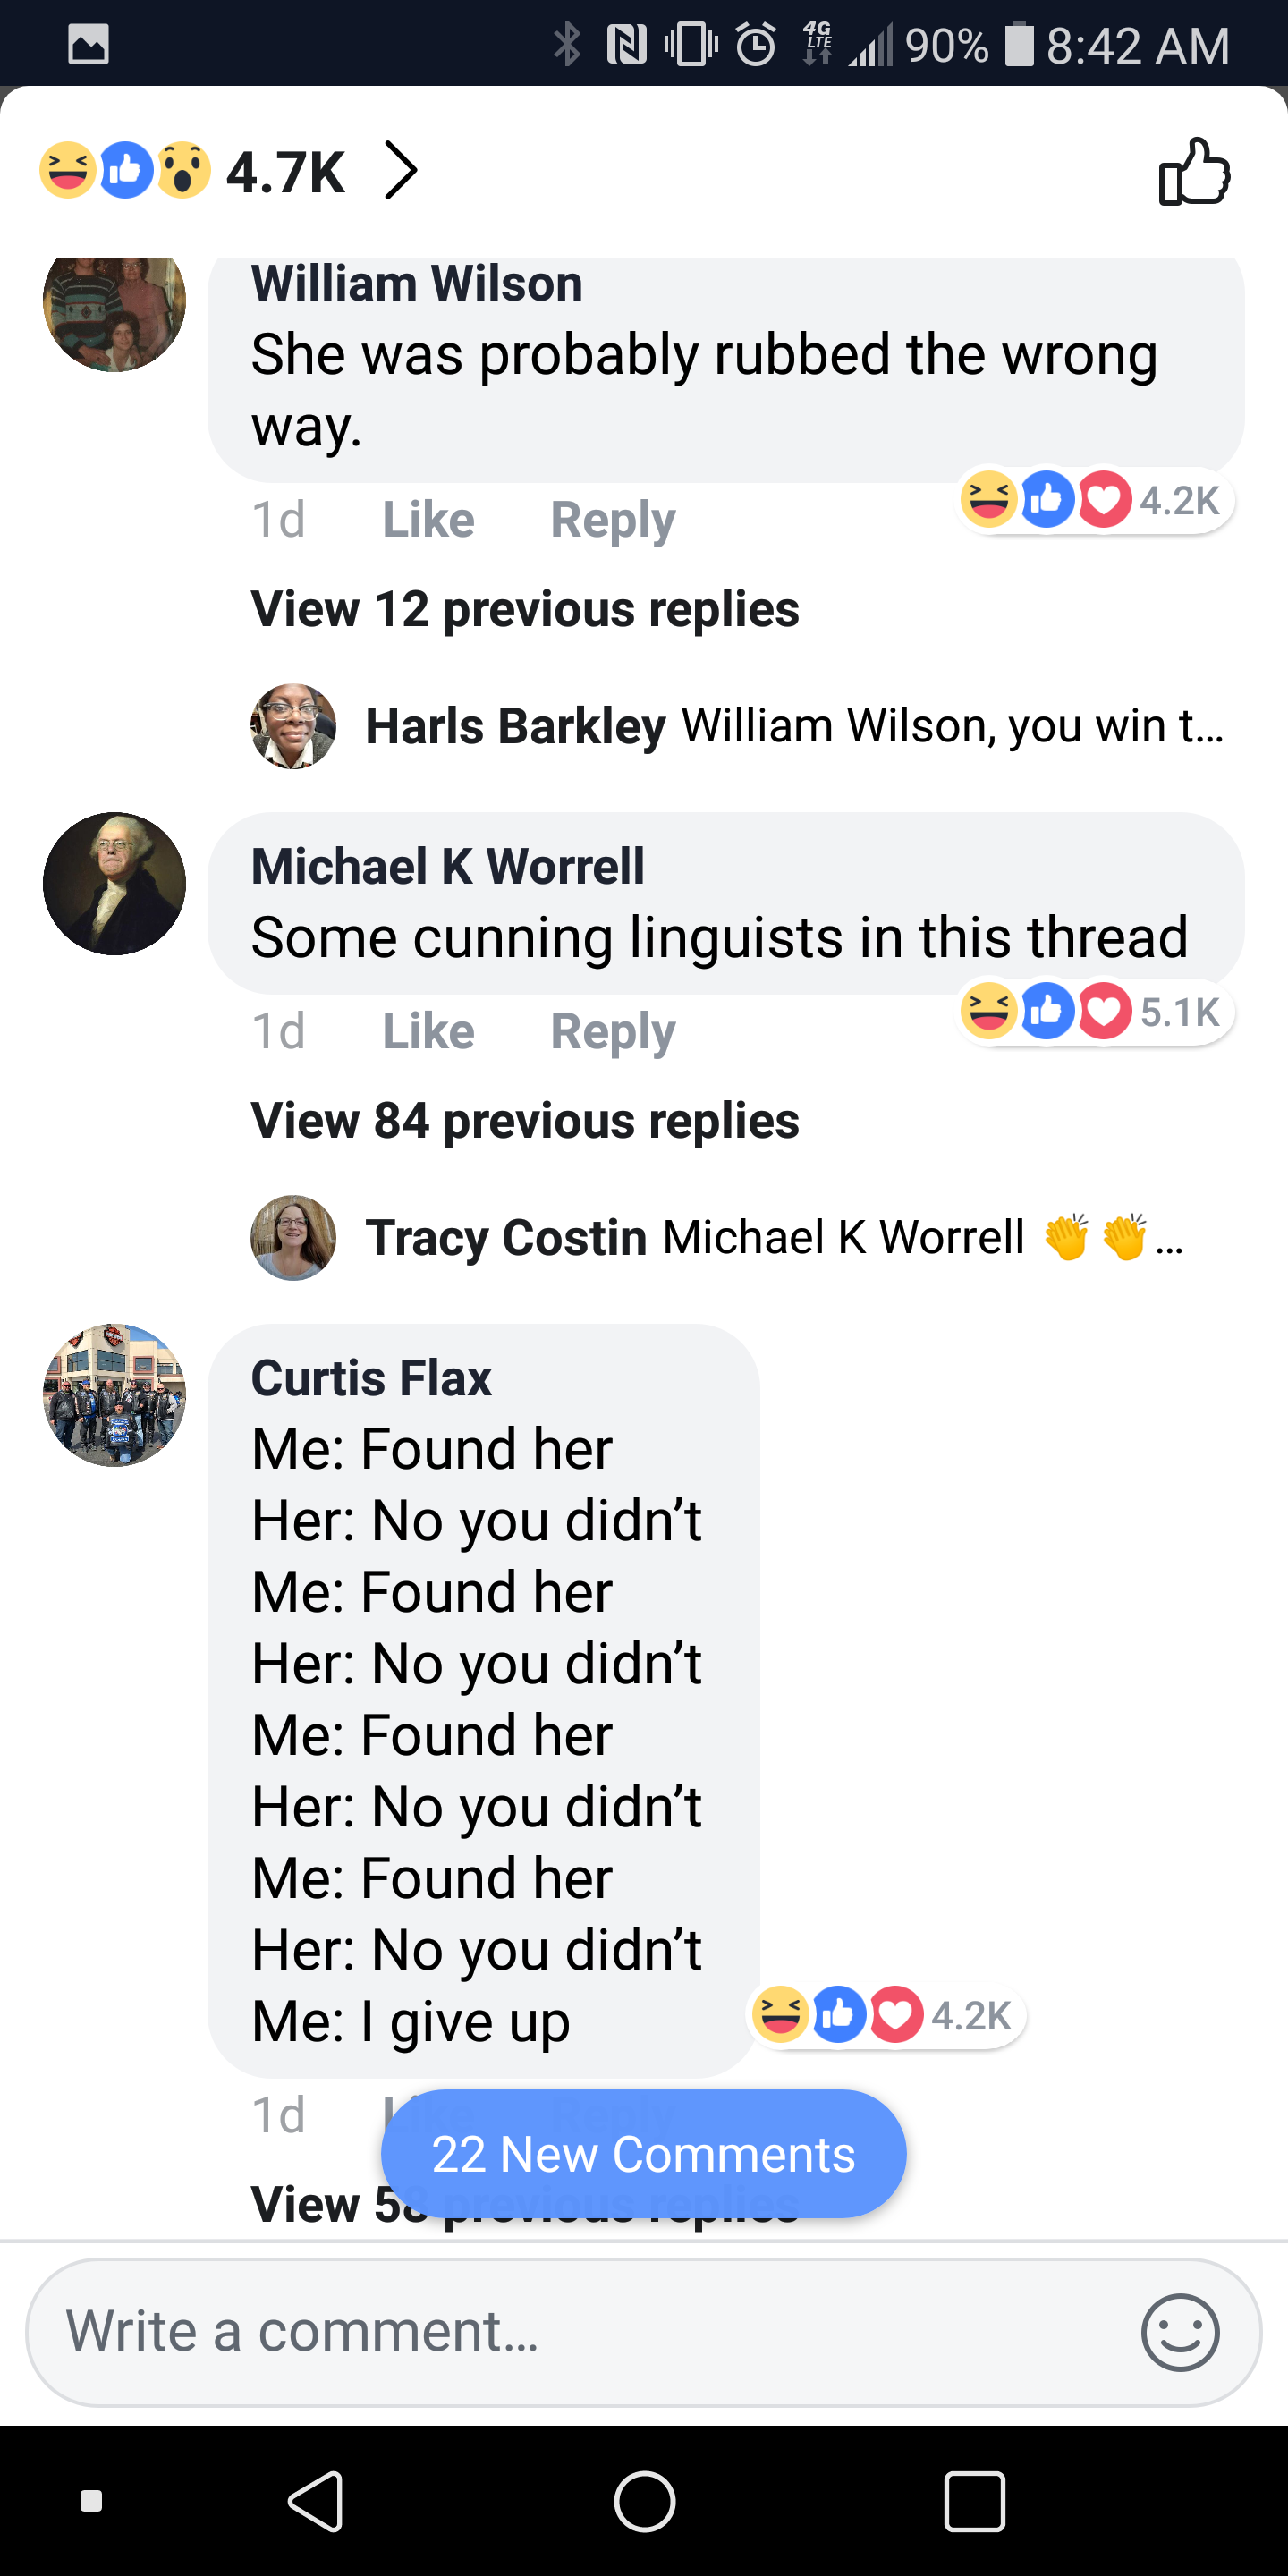 android messenger lite - 008 90% O > William Wilson She was probably rubbed the wrong way. 1d View 12 previous replies Harls Barkley William Wilson, you win ... Michael K Worrell Some cunning linguists in this thread 1d Oosik View 84 previous replies Trac